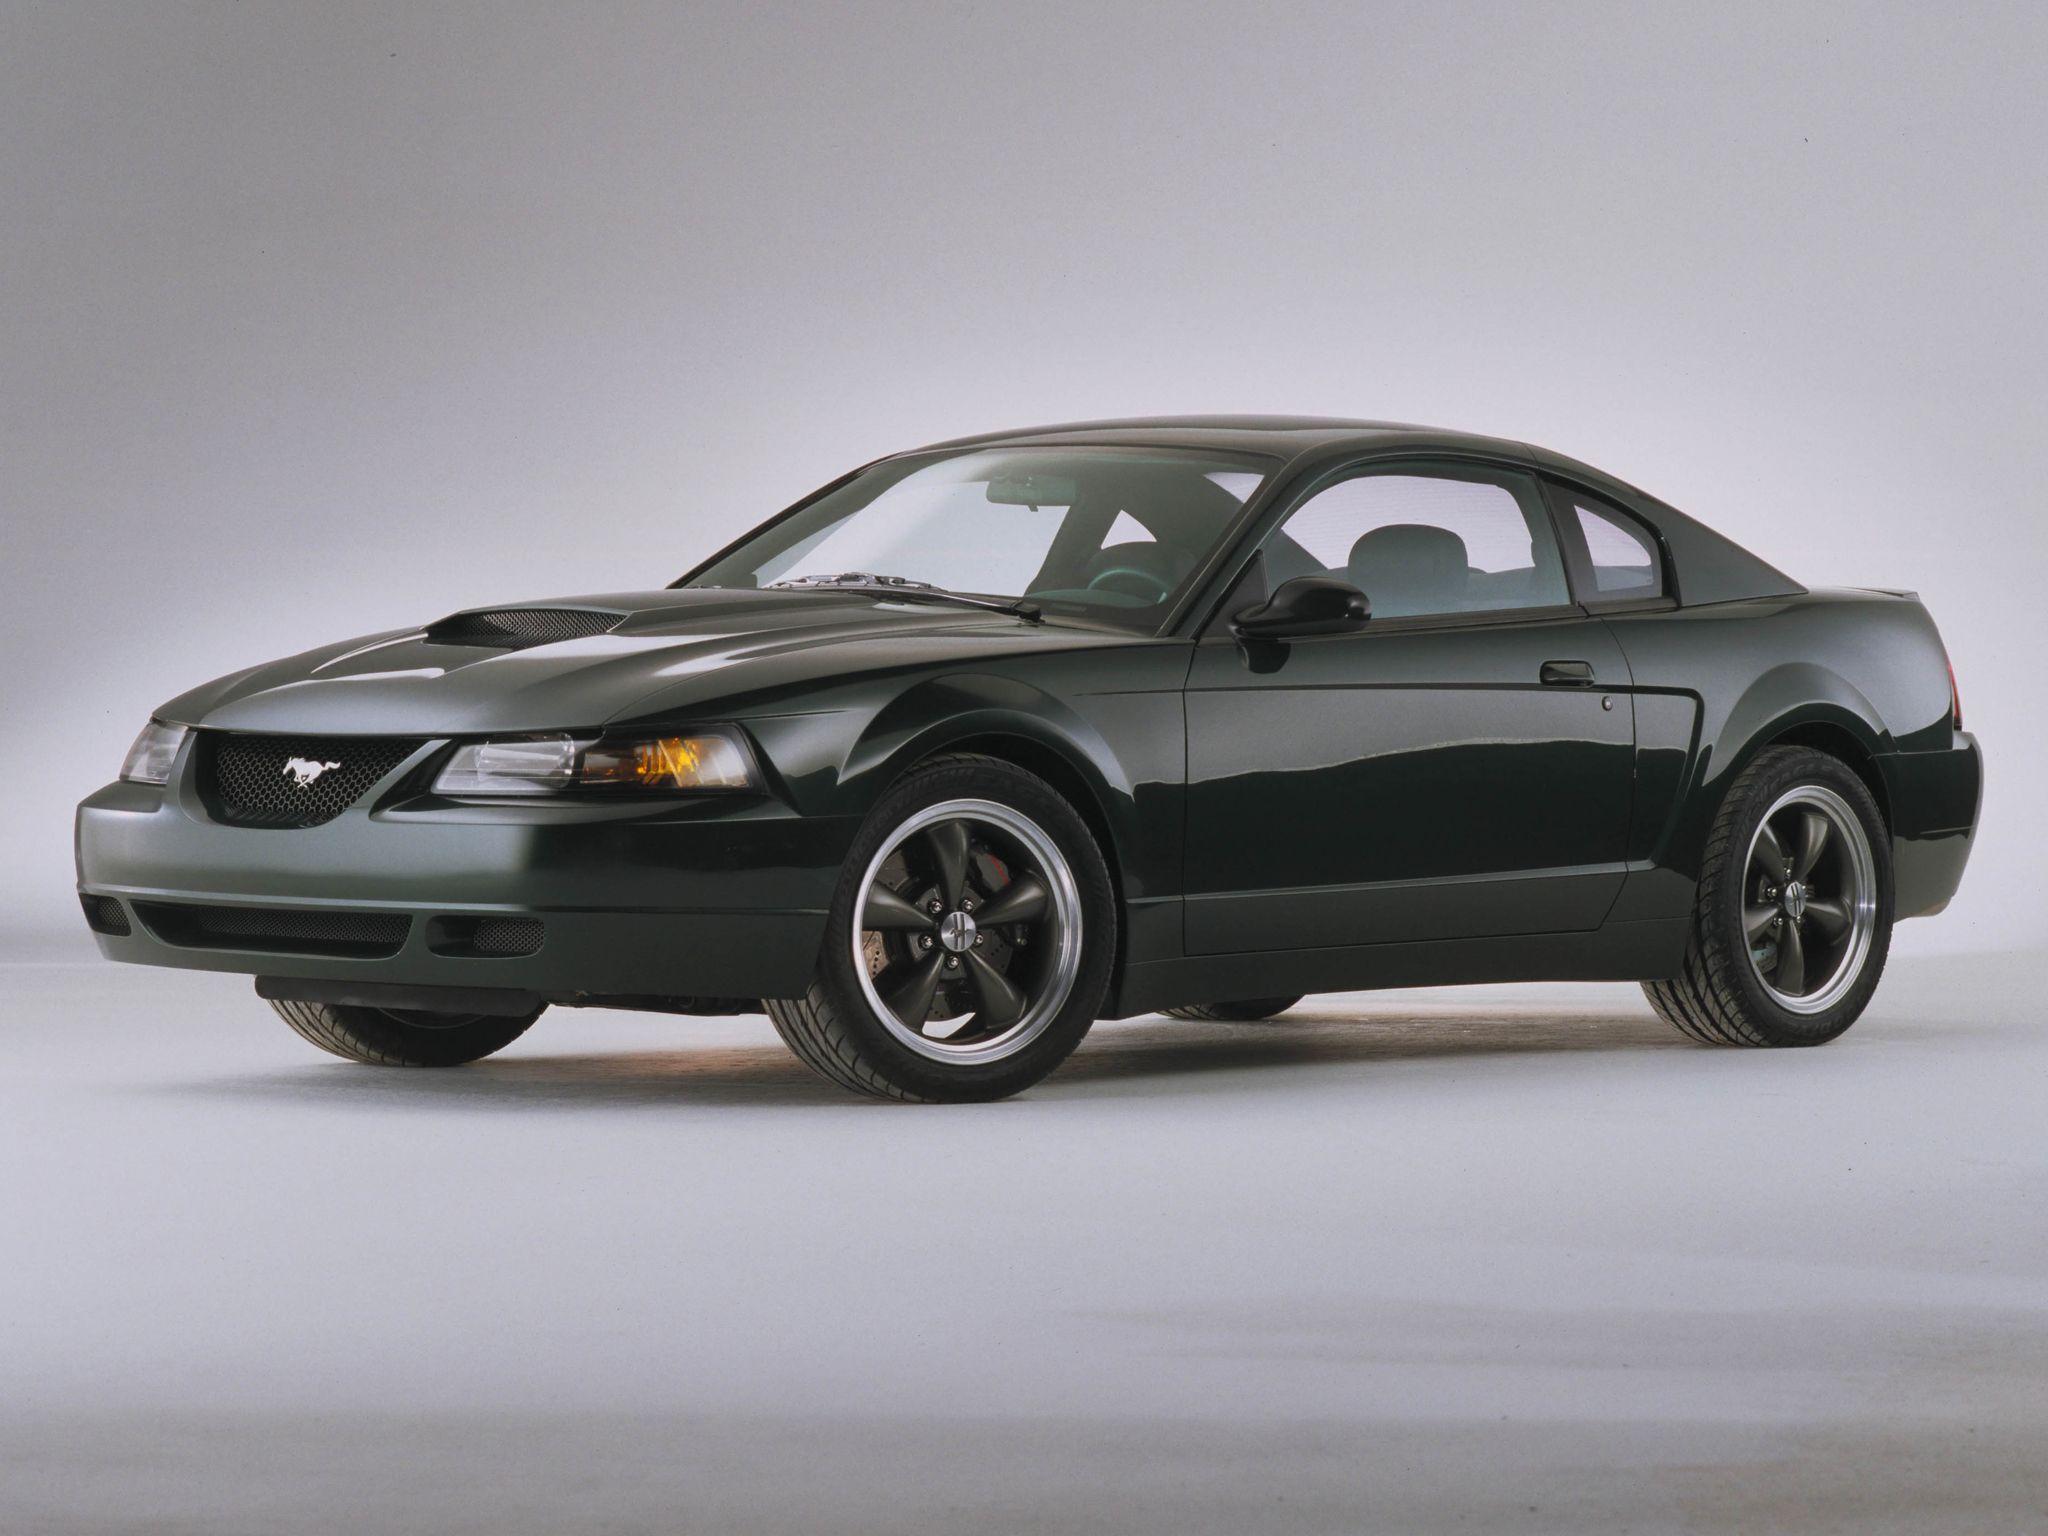 41+ 2000 Mustang Gt Wallpaper For Android free download